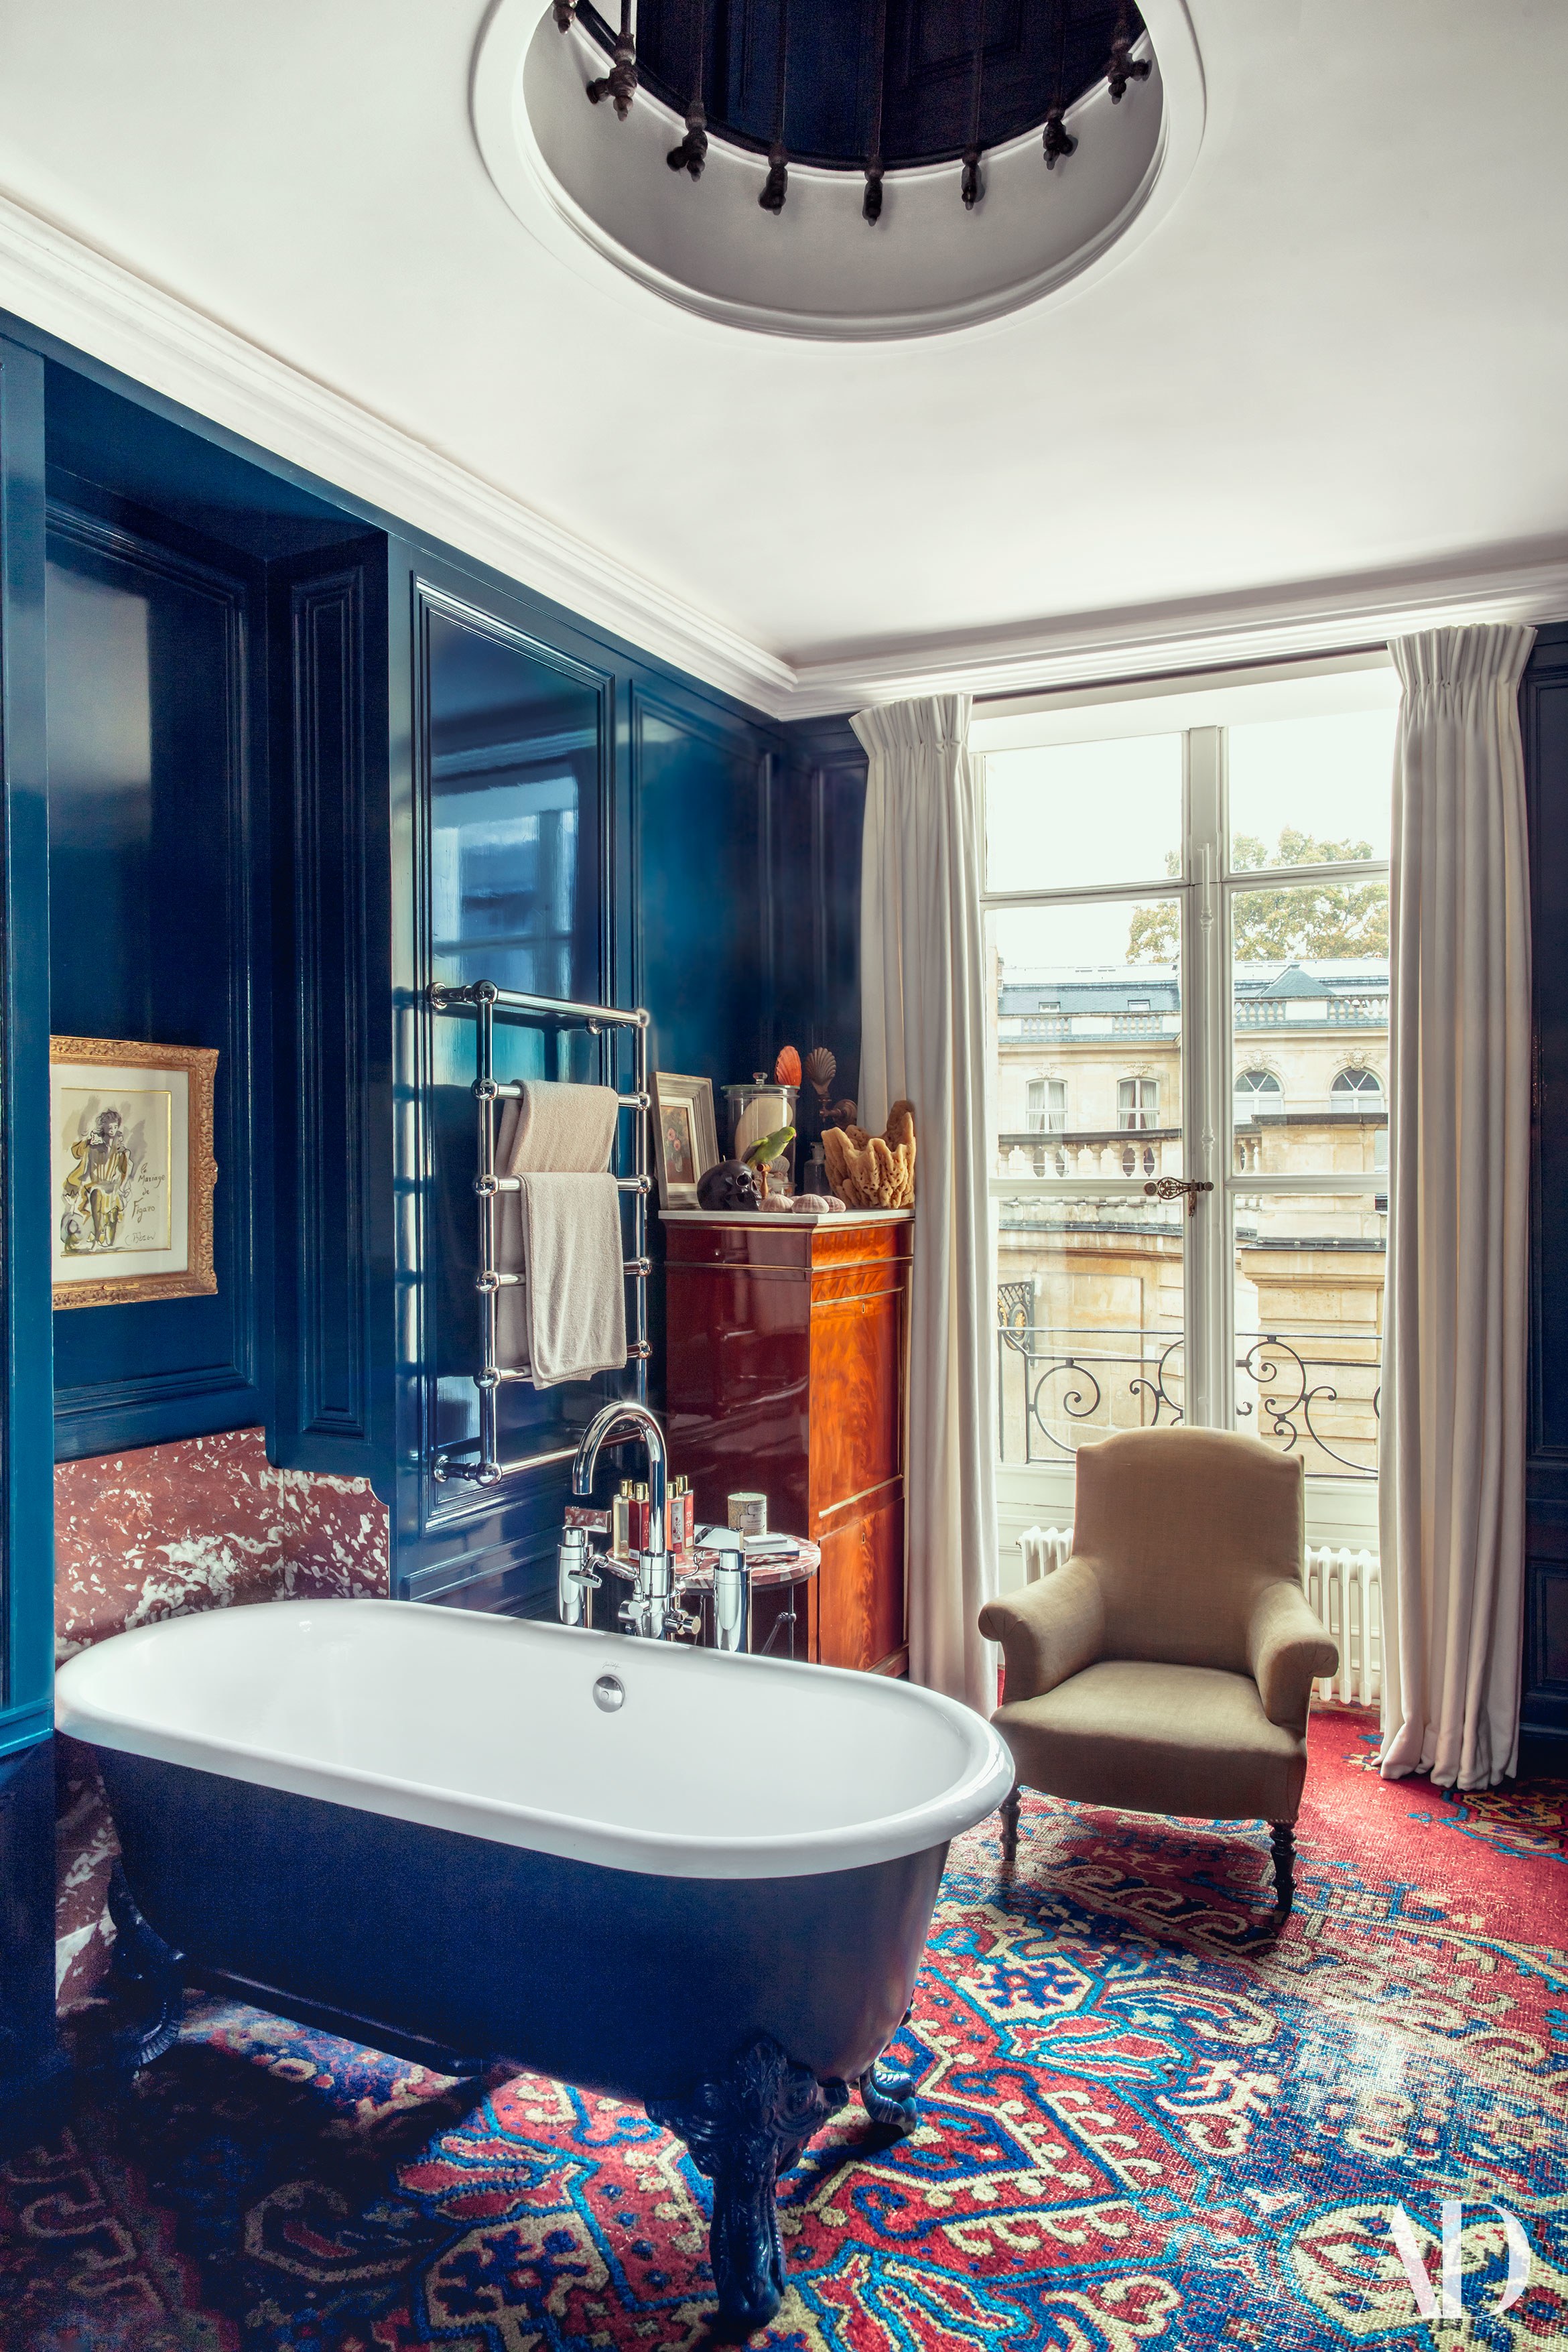 Décor Inspiration | At Home With: Pierre Sauvage, an 18th-Century Apartment in Paris